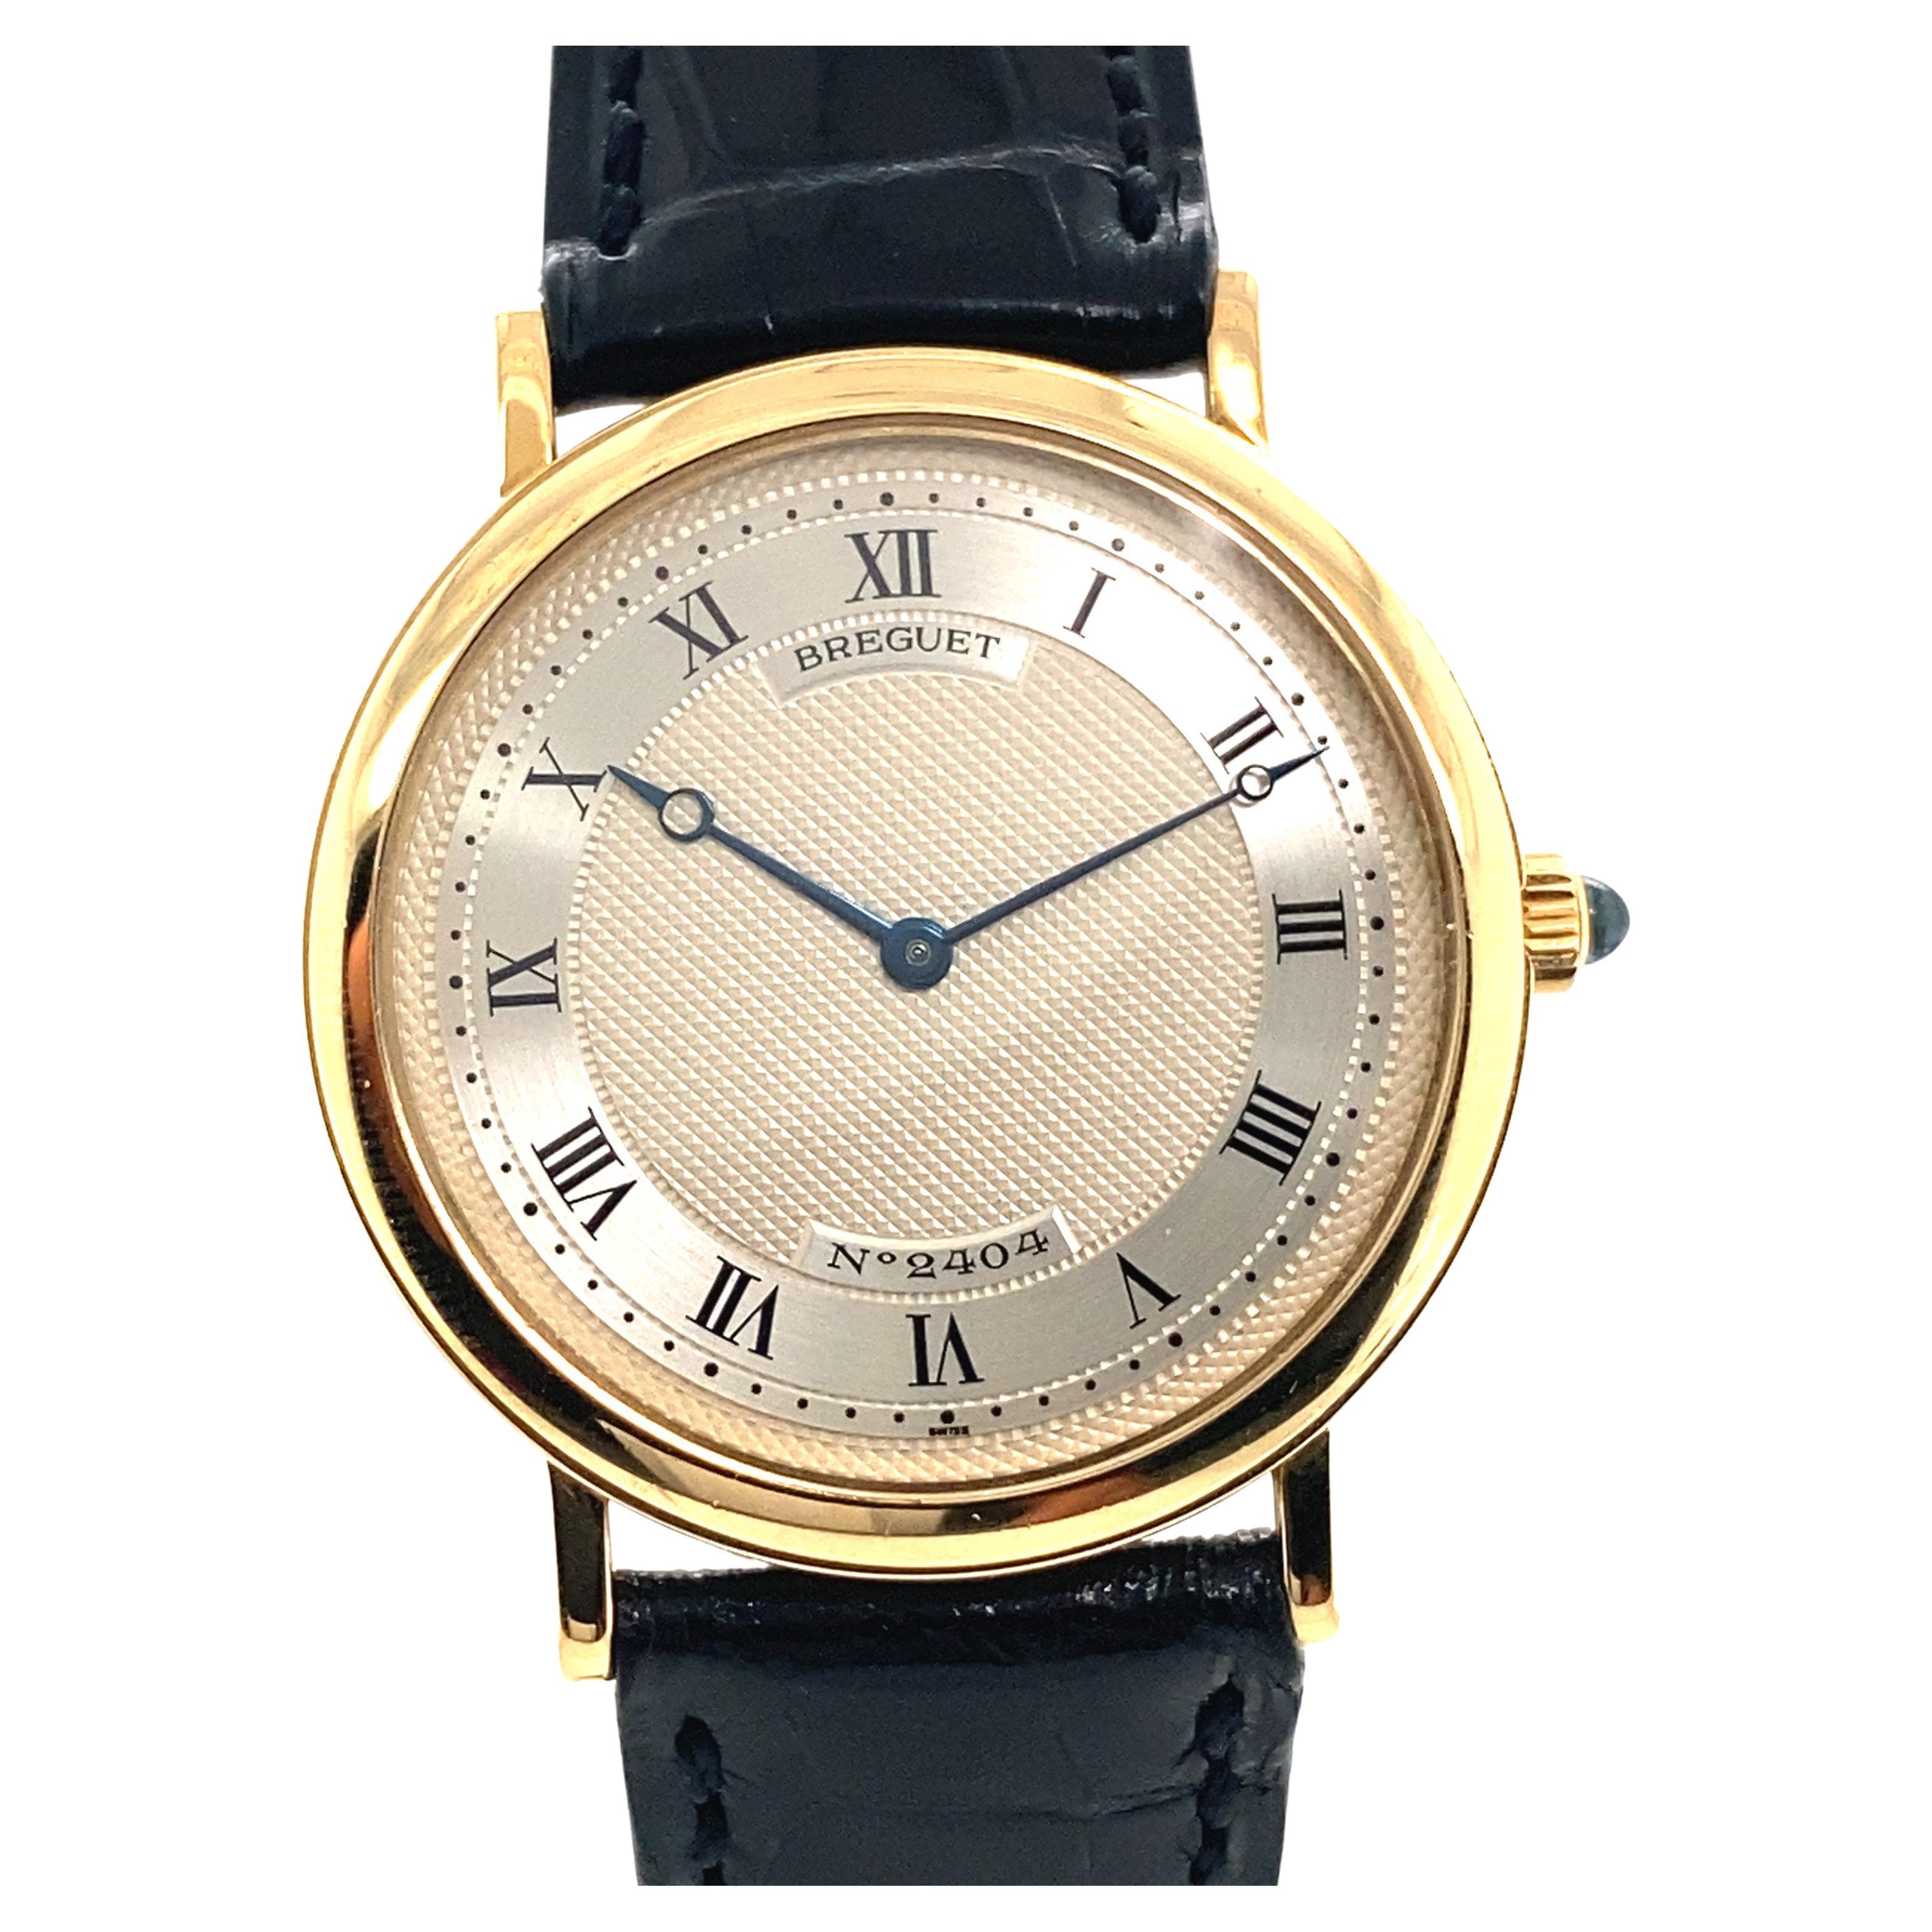 Automatic Breguet Classic Watch with 18K Gold Folding Clasp